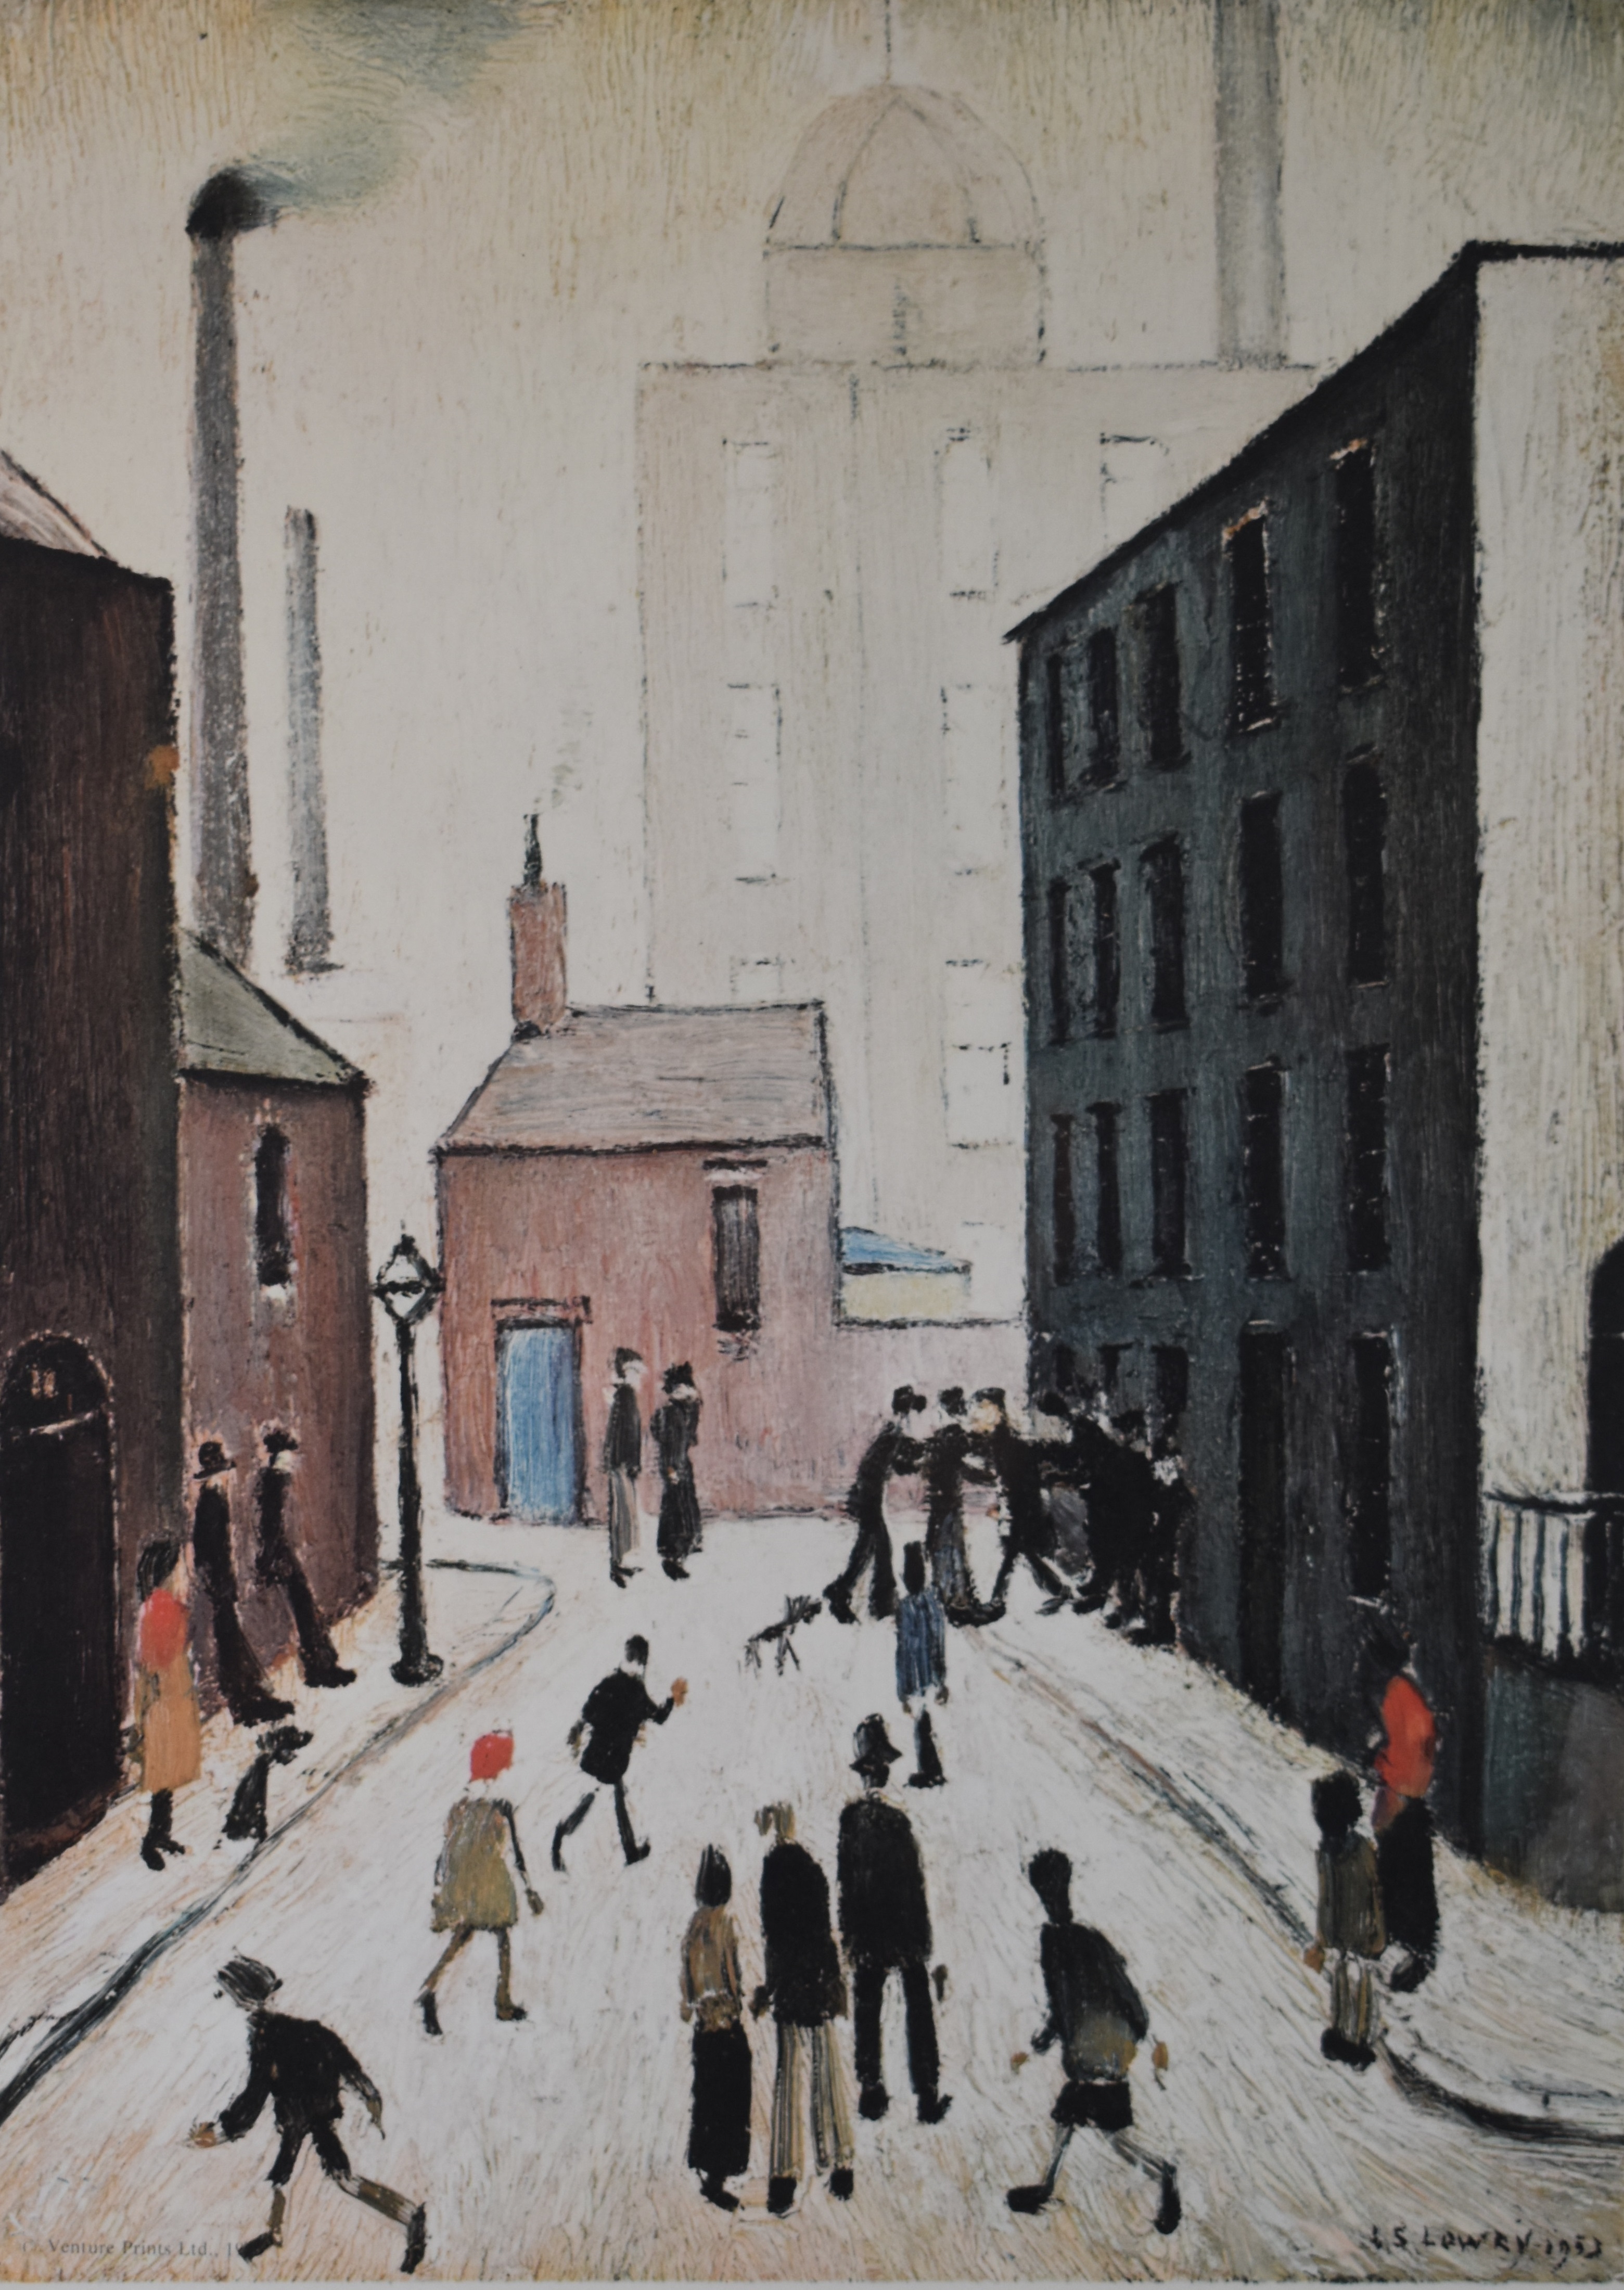 Lawrence Stephen Lowry (1887-1976) signed limited edition (of 850) print by Venture Prints Ltd